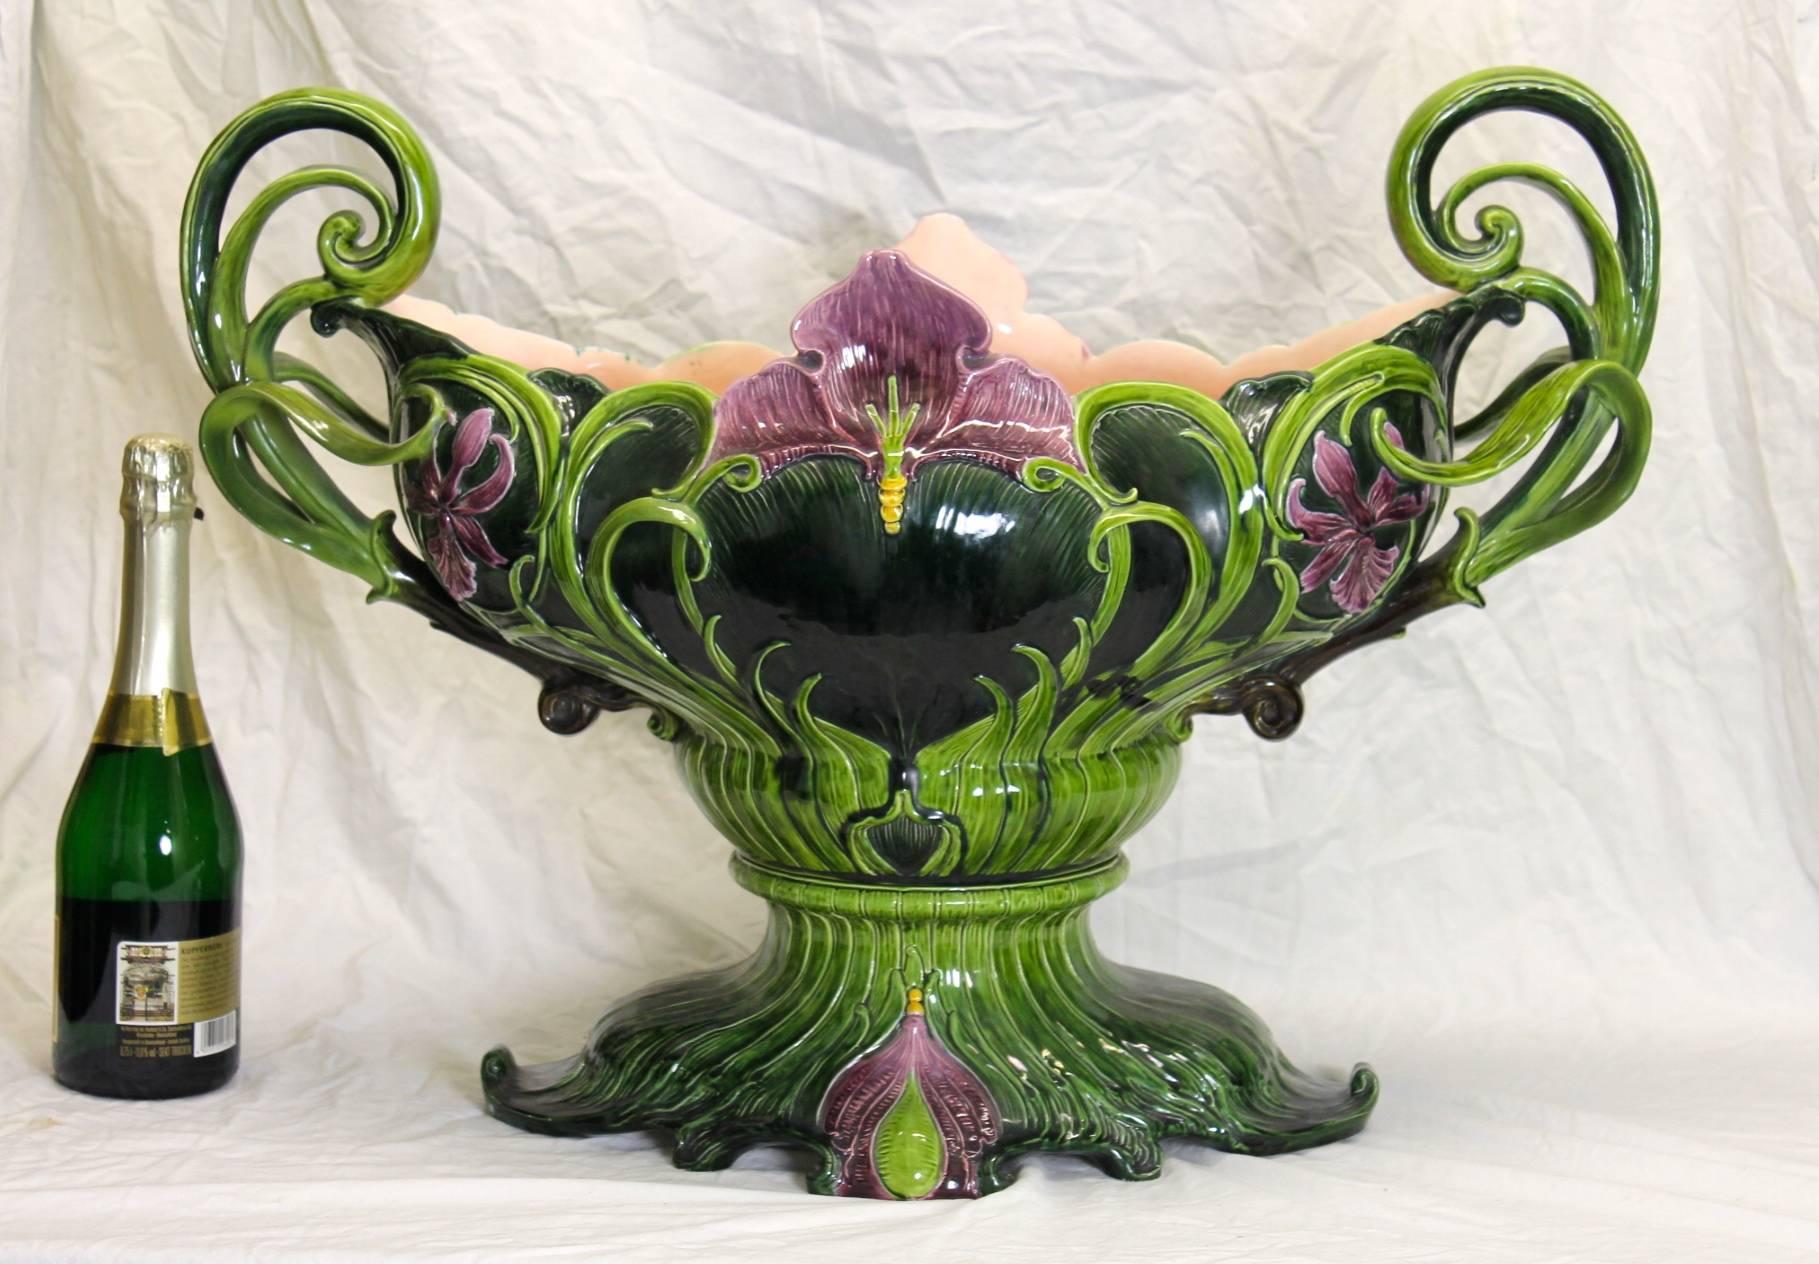 Absolute rare, outstanding monumental Art Nouveau Jardiniere from the early 20th century out of the world famous manufactory of Julius Dressler in Bohemia. A breathtaking Majolica masterpiece in this size (just watch the second picture with a